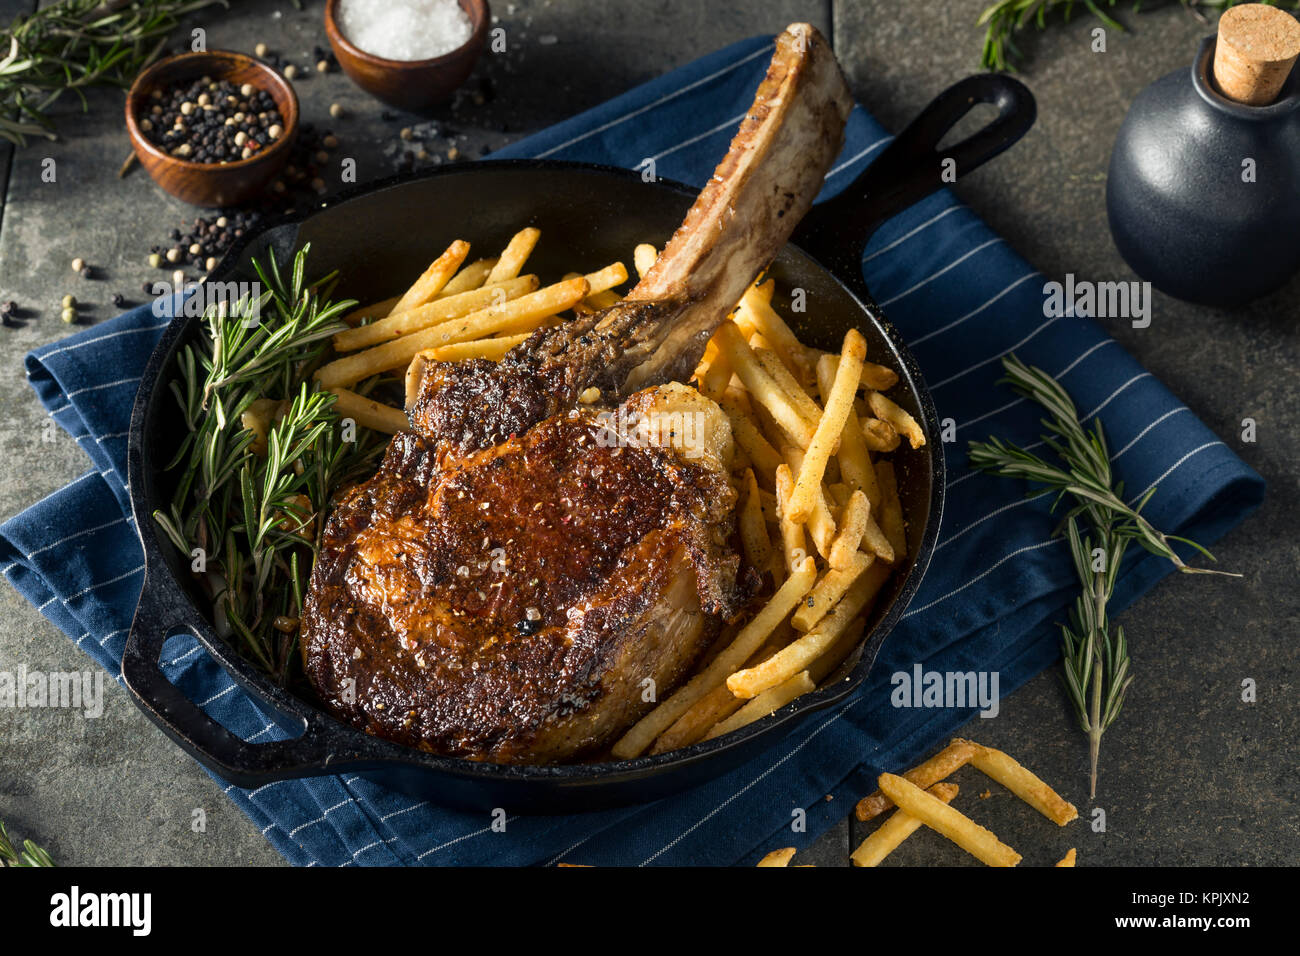 Cooked Grass Fed Tomahawk Steaks with Fries and Rosemary Stock Photo